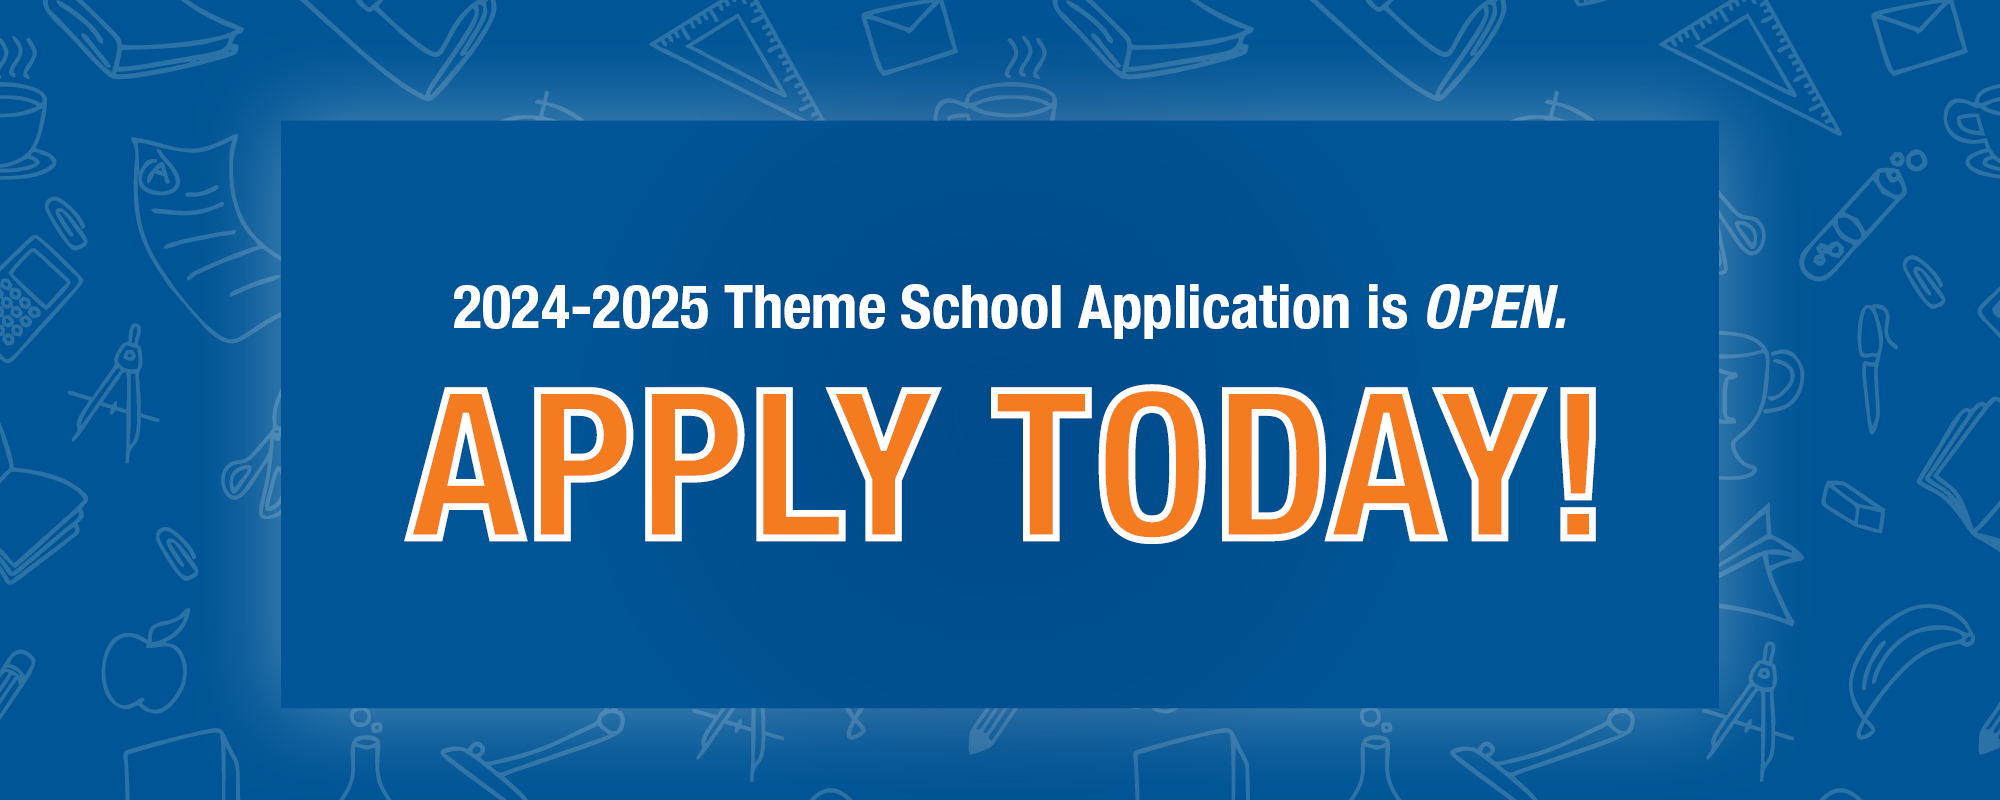 2023-2024 Theme School Application is OPEN. Apply Today!